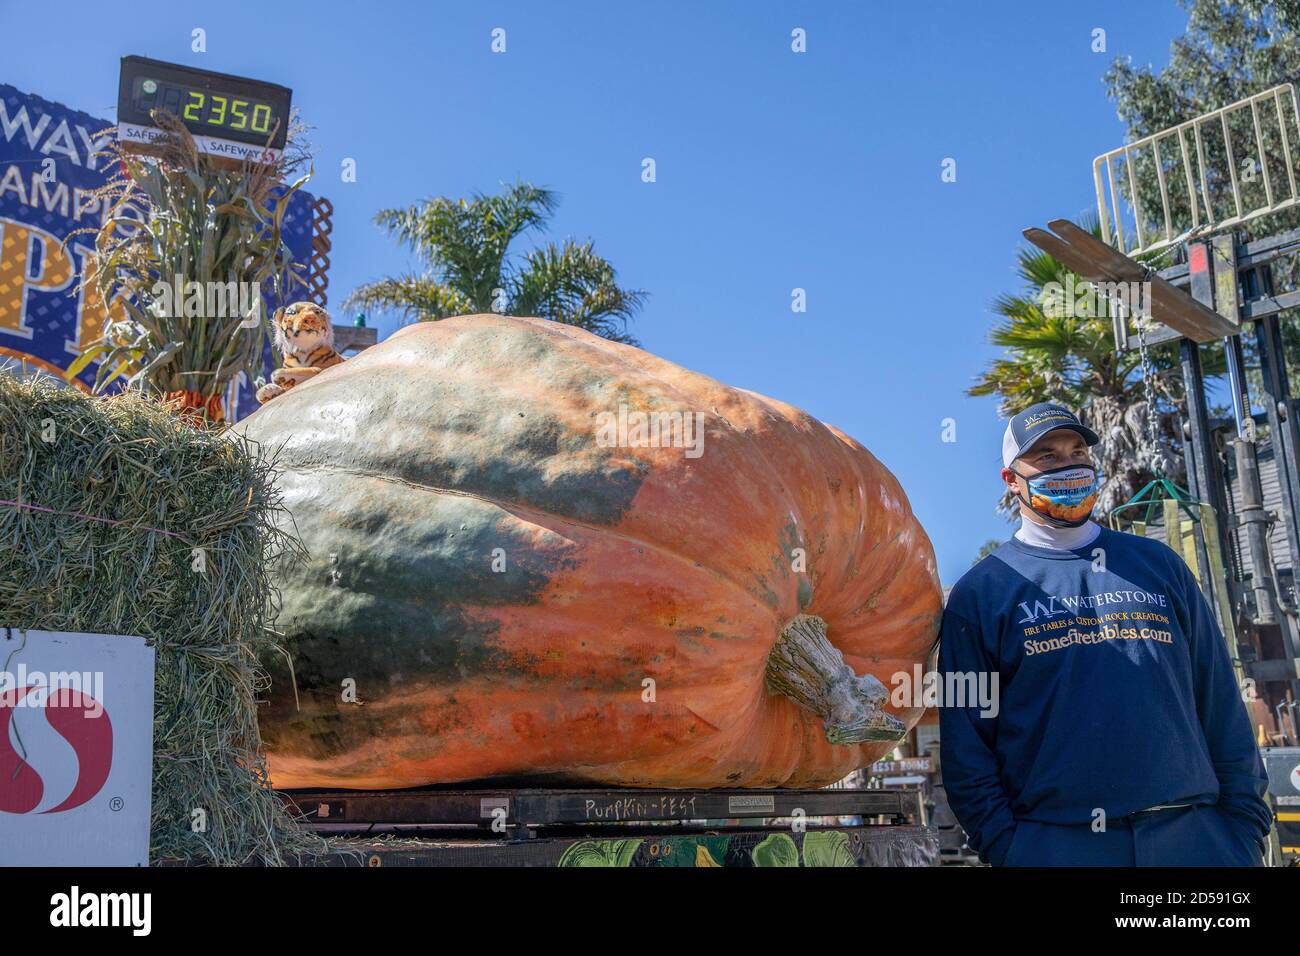 San Francisco. 12th Oct, 2020. A pumpkin weighing 2350 pounds (about 1.066 tons), the winer of the annual pumpkin-weighing competition is shown in the photo taken on Oct. 12, 2020 in San Mateo, California, the United States. Credit: Li Jianguo/Xinhua/Alamy Live News Stock Photo